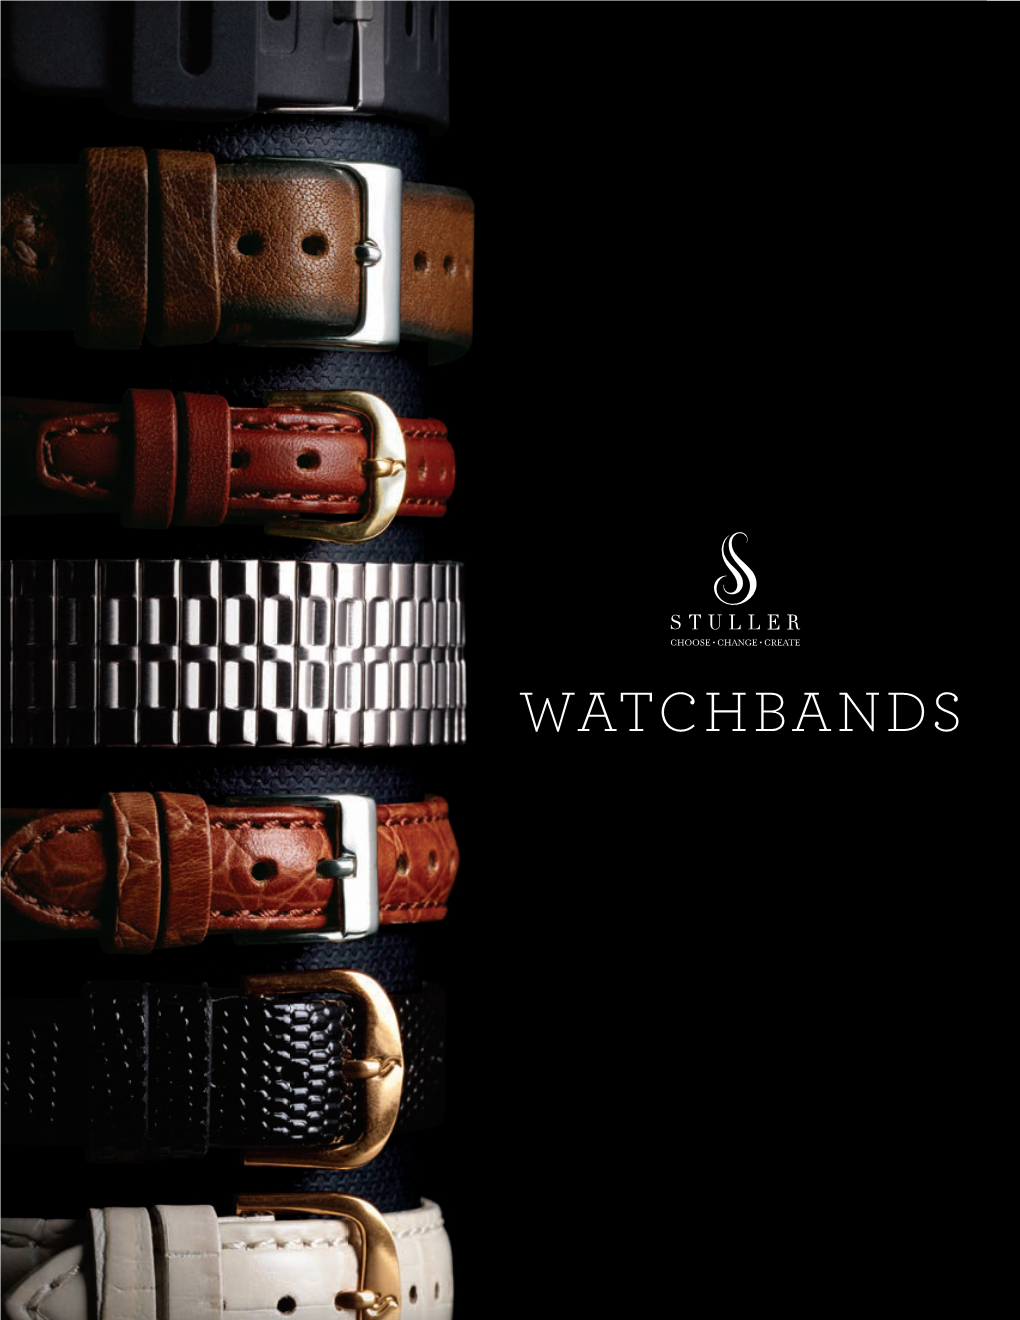 WATCHBANDS Why Stuller for Your Watchband Business?